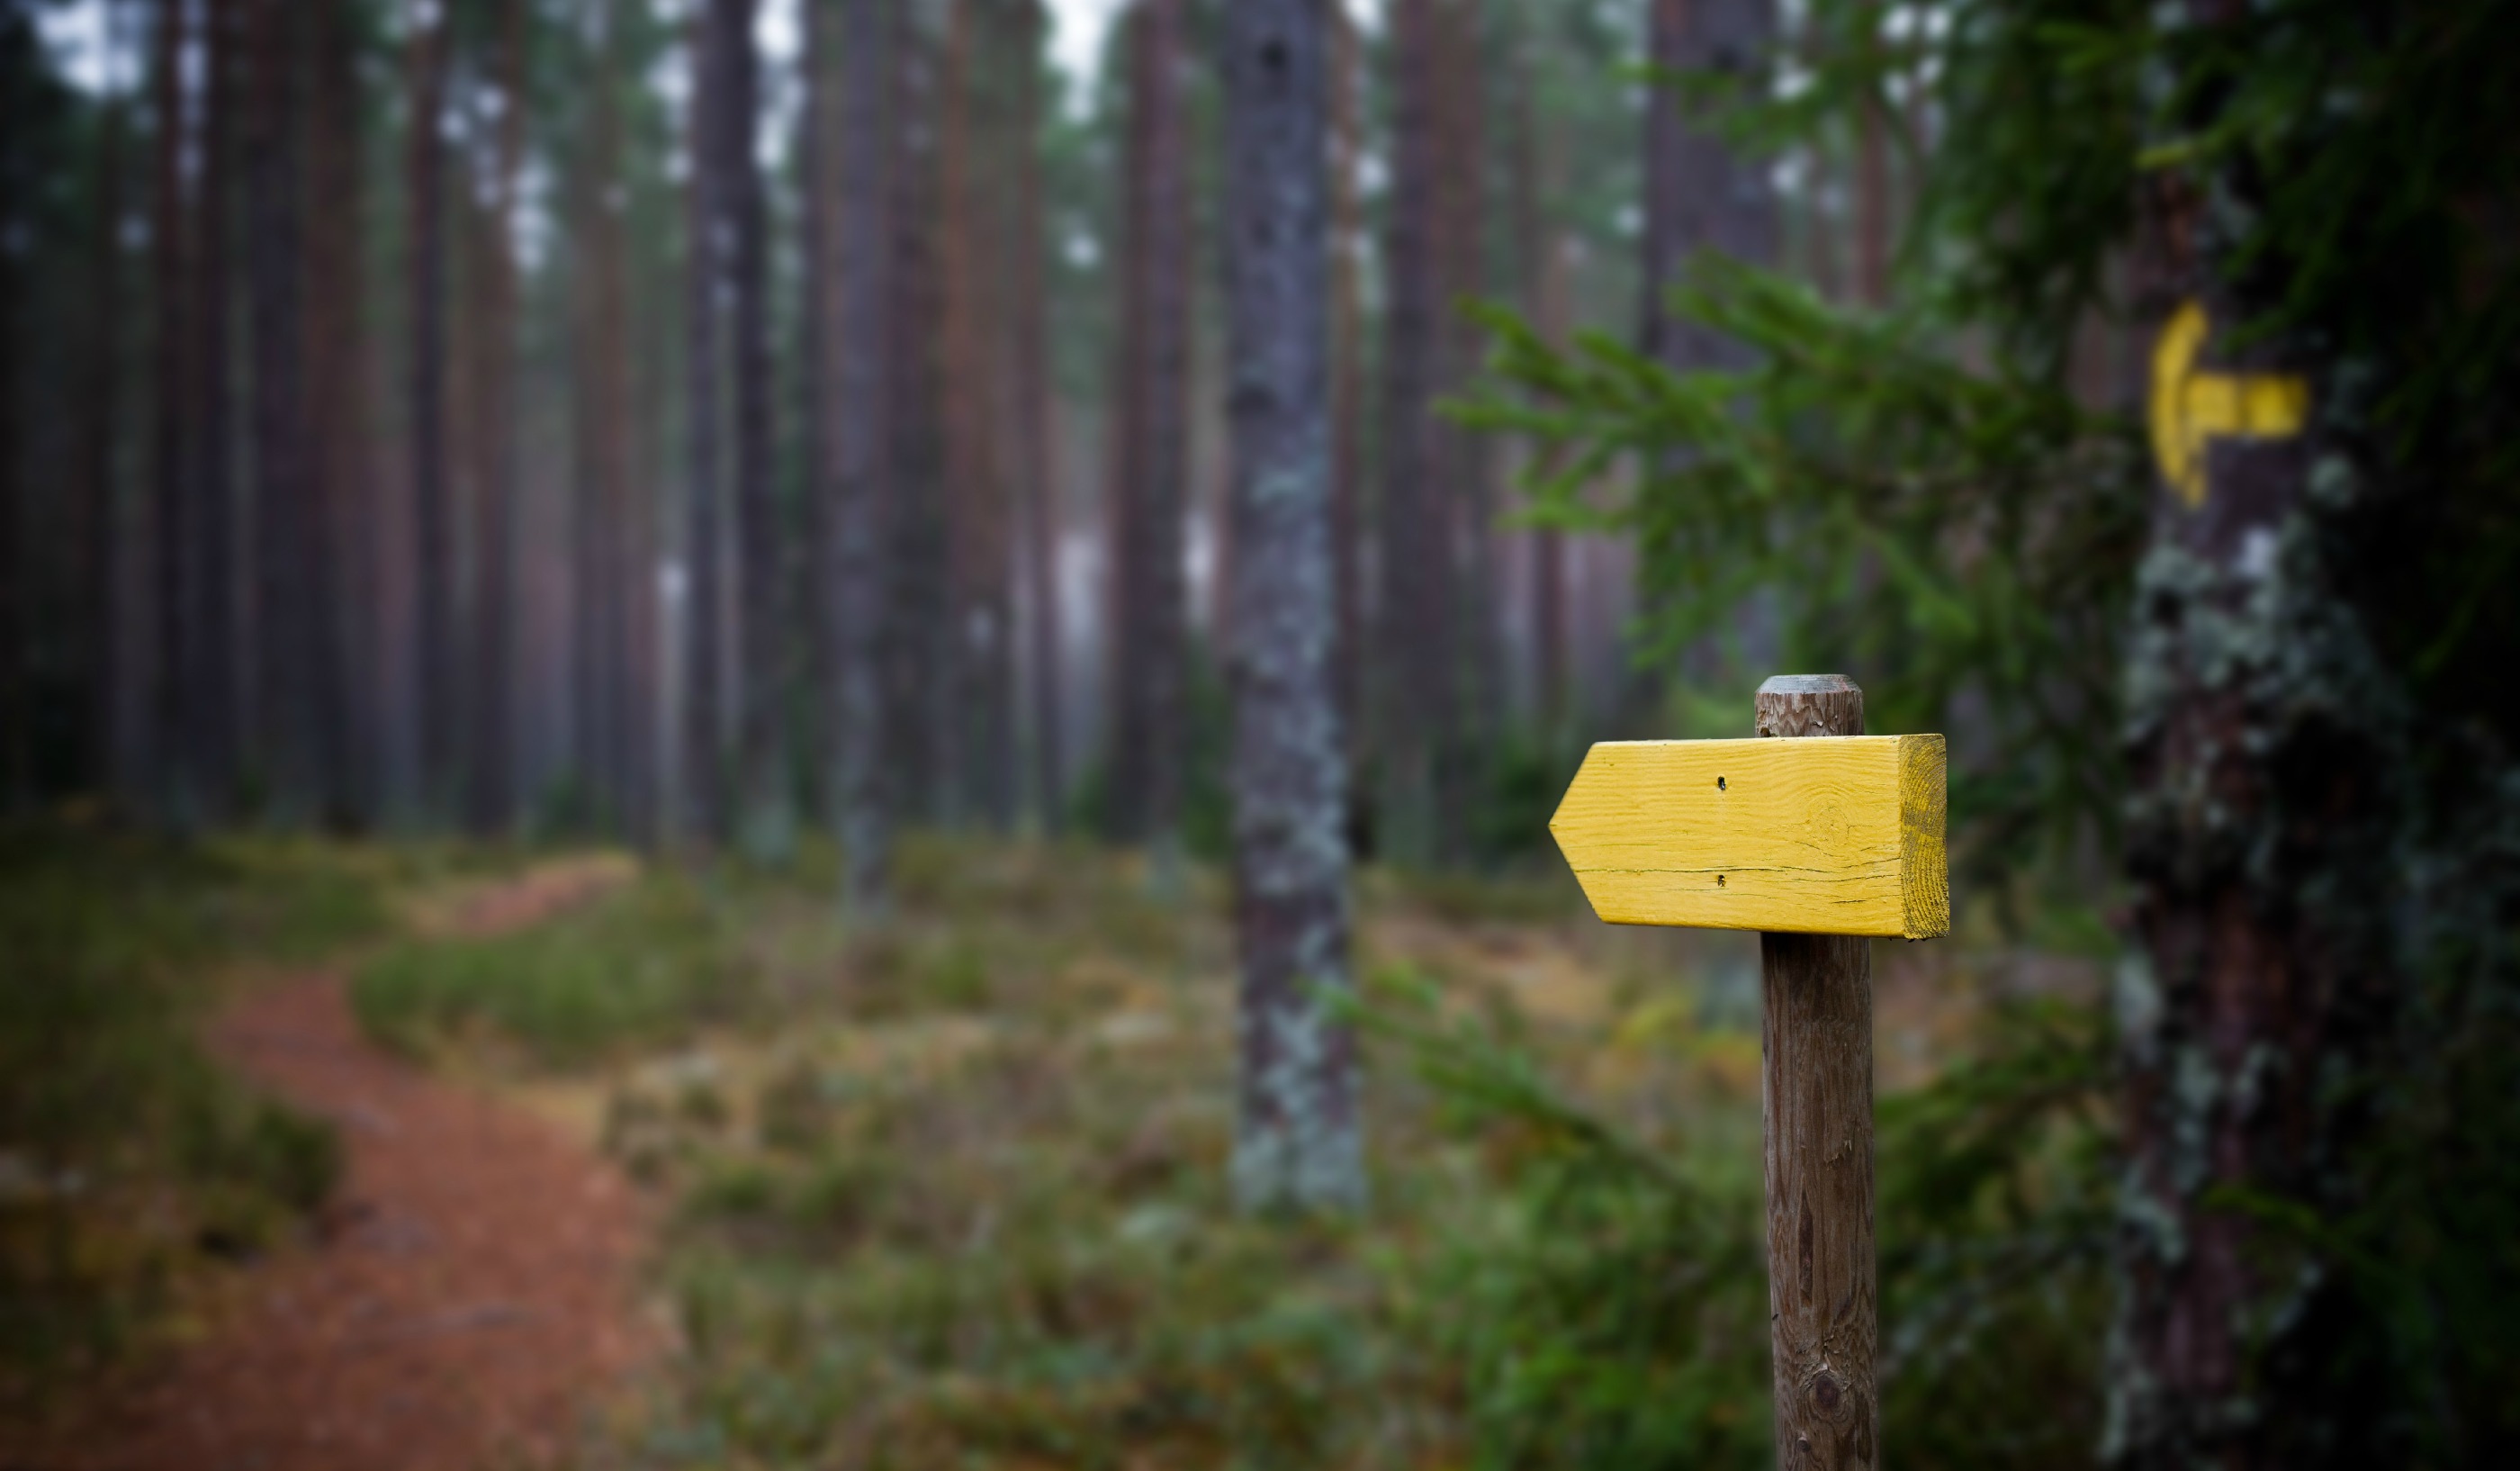 Websites & Trail Races: It's All About the Navigation